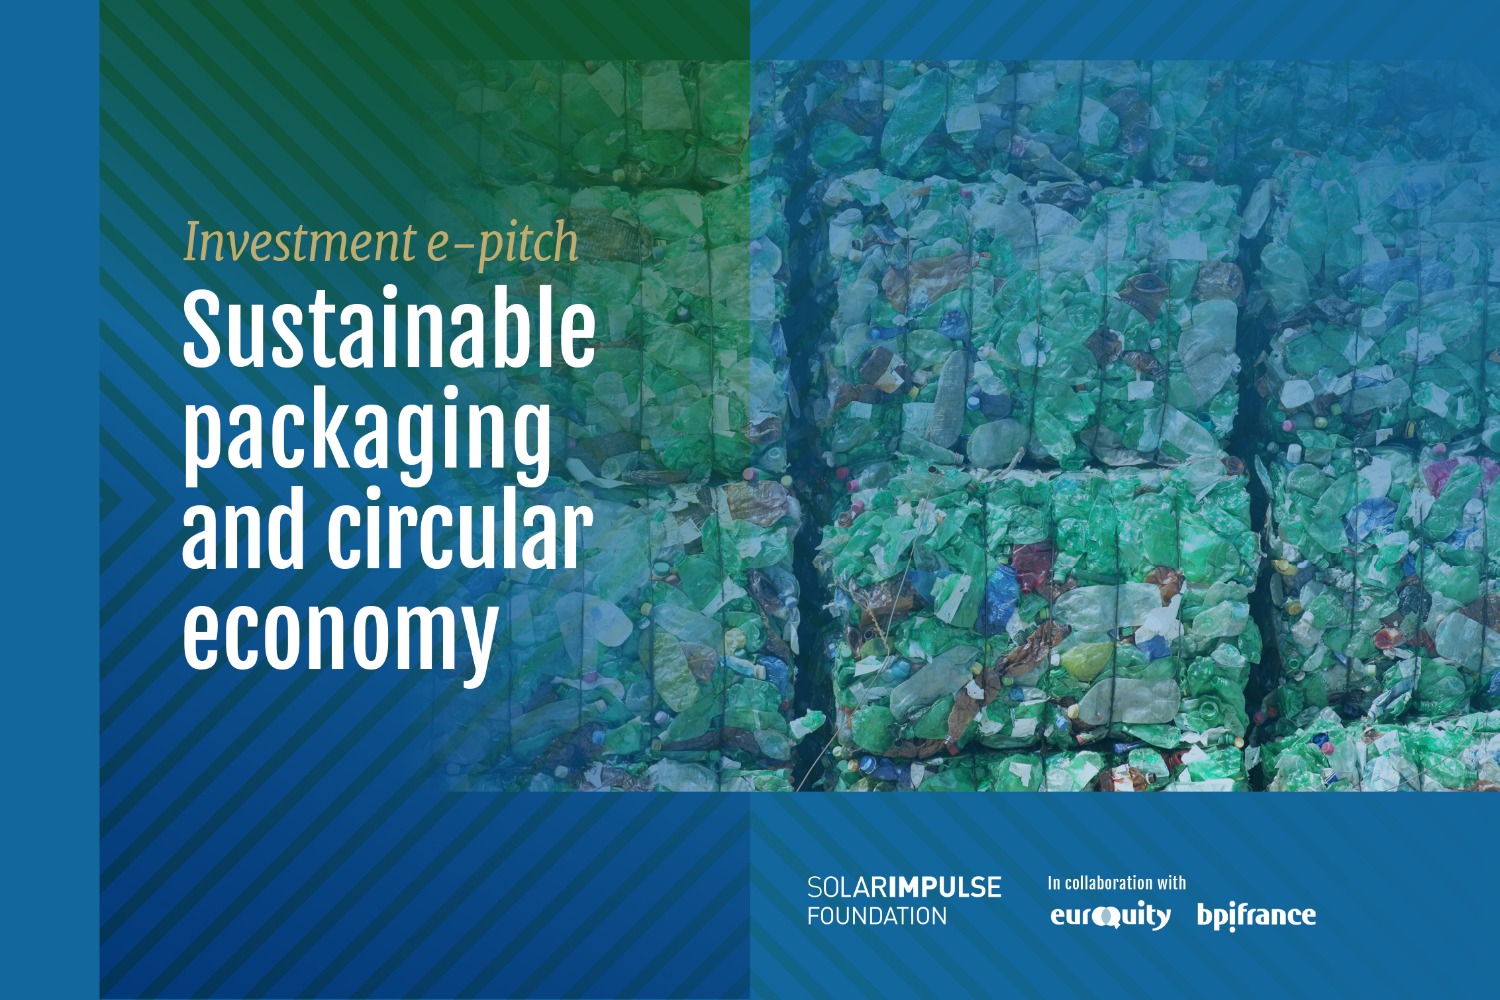 E-Pitch Solar Impulse Investment - "Sustainable packaging &amp; circular economy" 